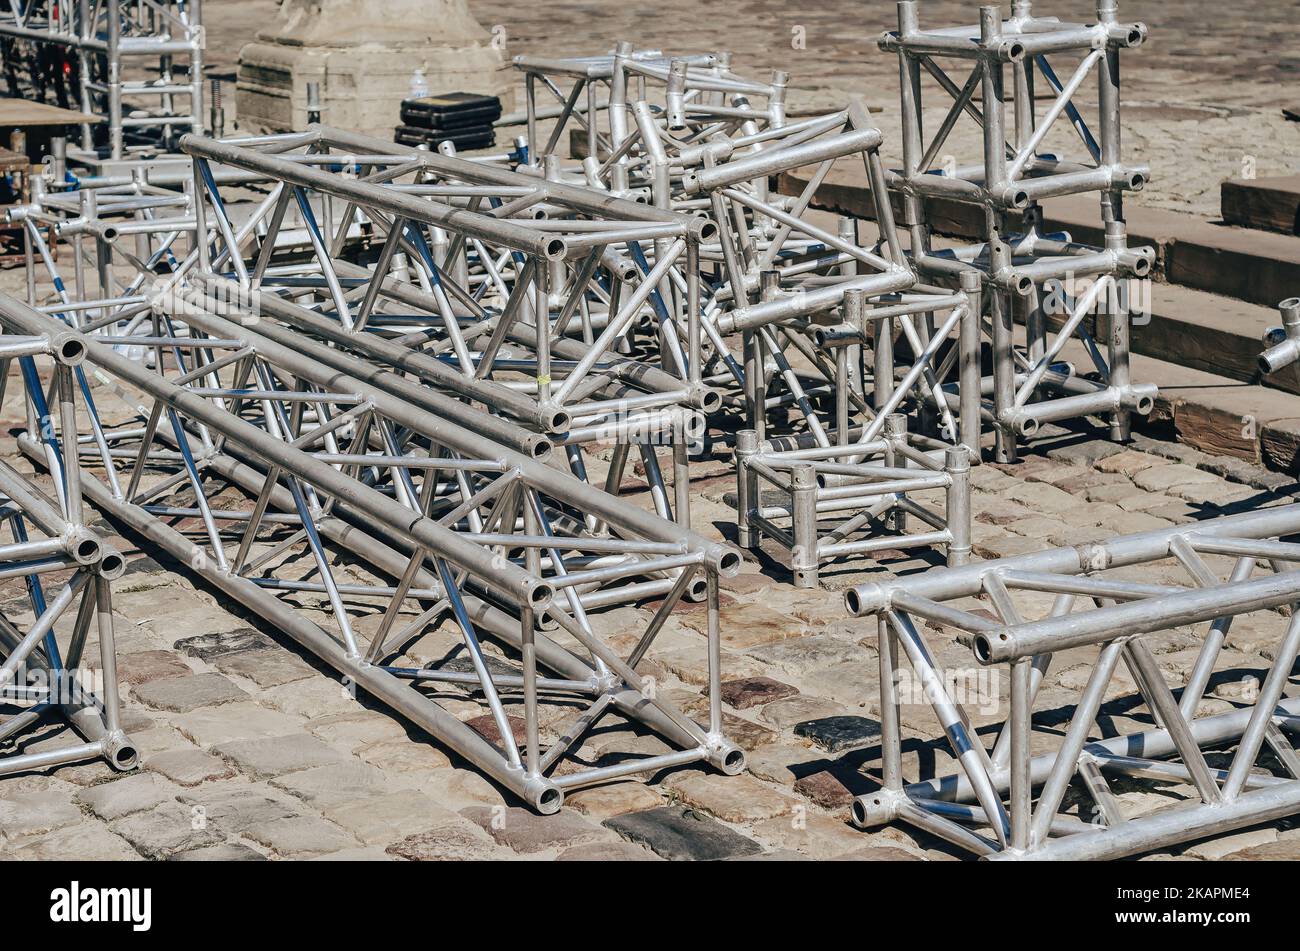 Metal trusses. Metal structures for stage installation lie on pavement. Stock Photo